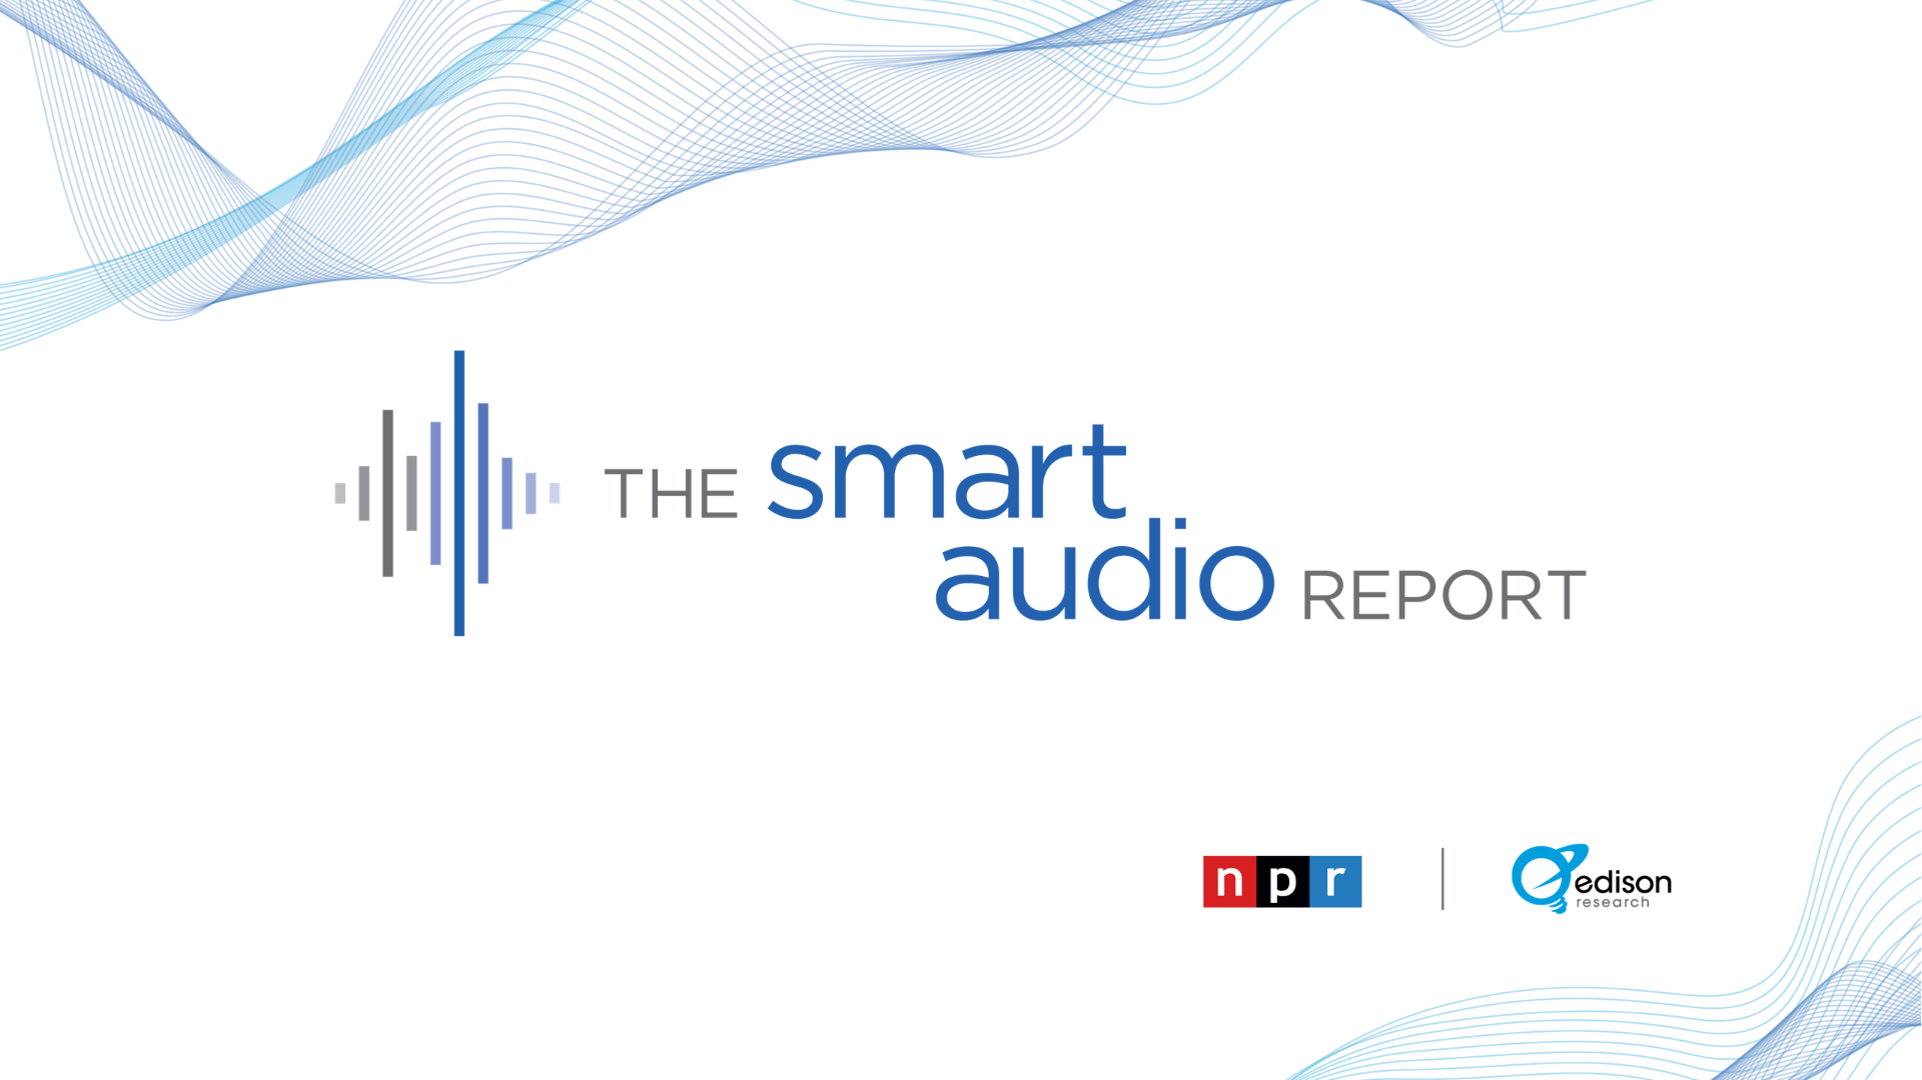 The Smart Audio Report and NPR logo